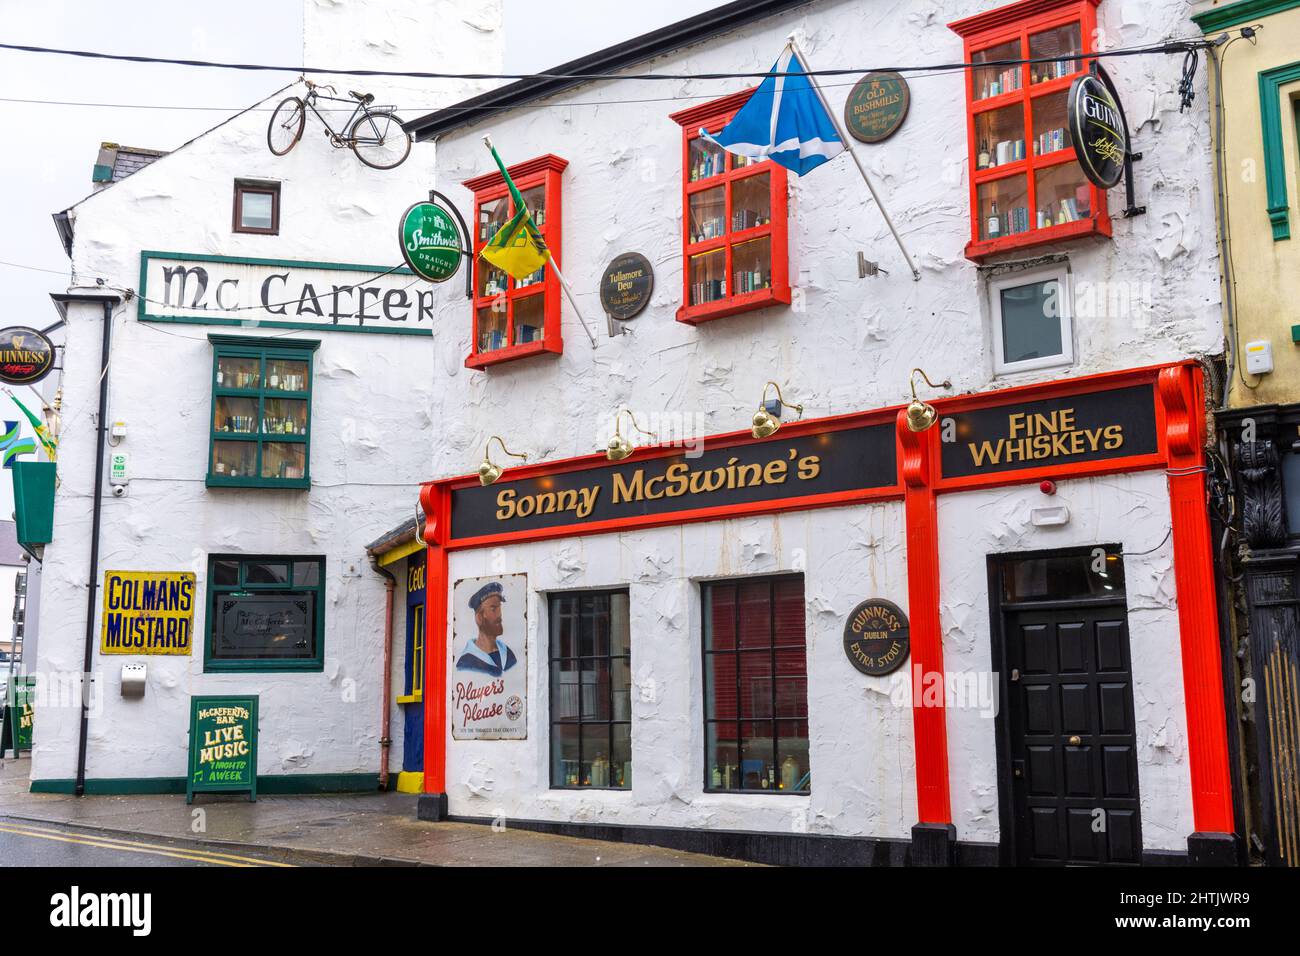 Farbenfrohe Bar-Pub-Fassade in Donegal Town, County Donegal, Irland. Stockfoto